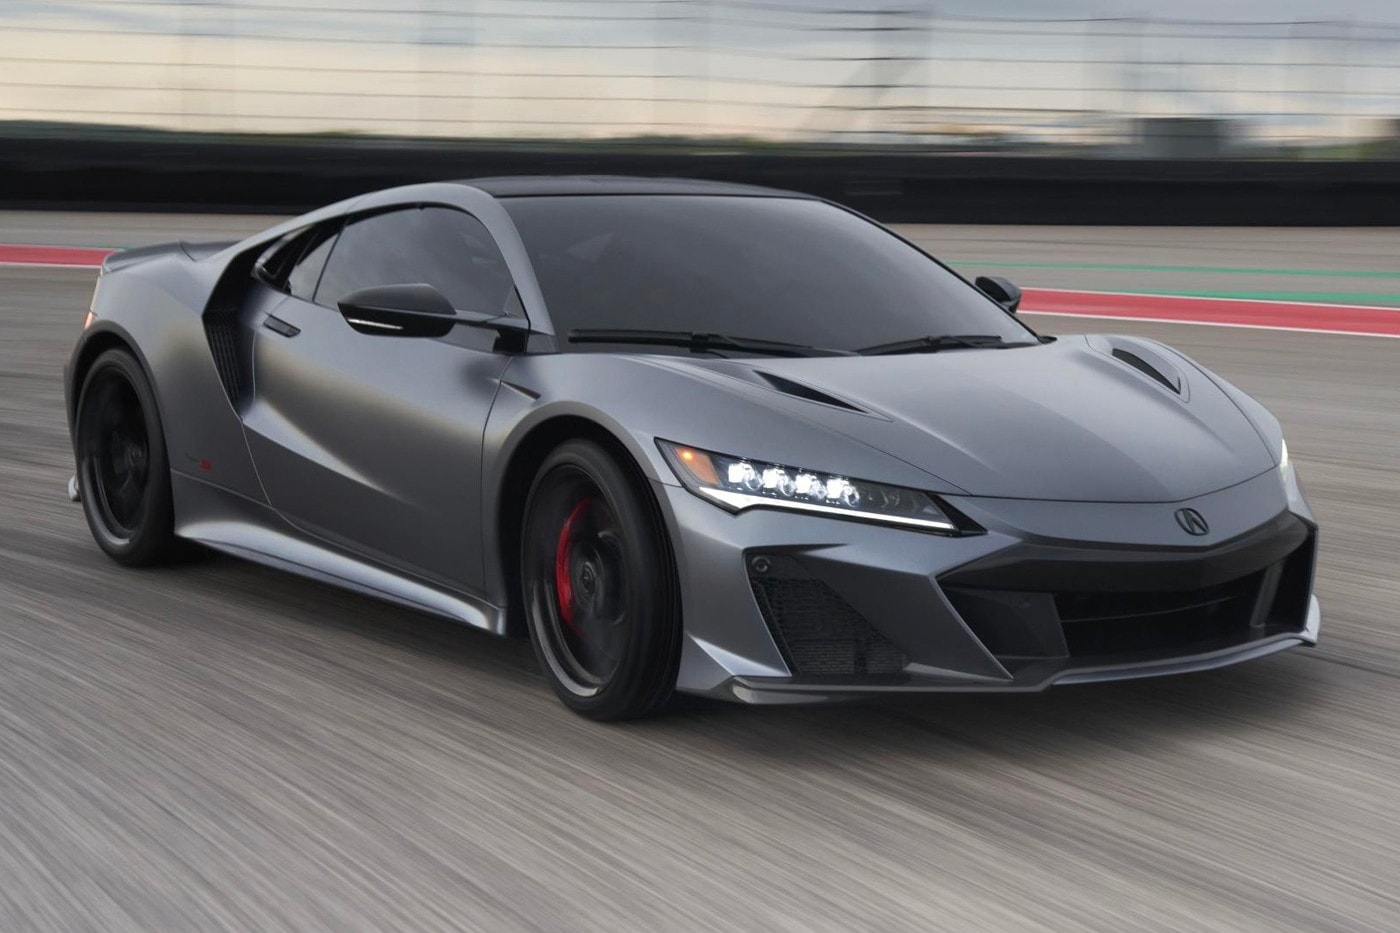 2022 Acura NSX Type S 300 reserved in 24 hours US orders supercars honda JDM Racing United States Japan 